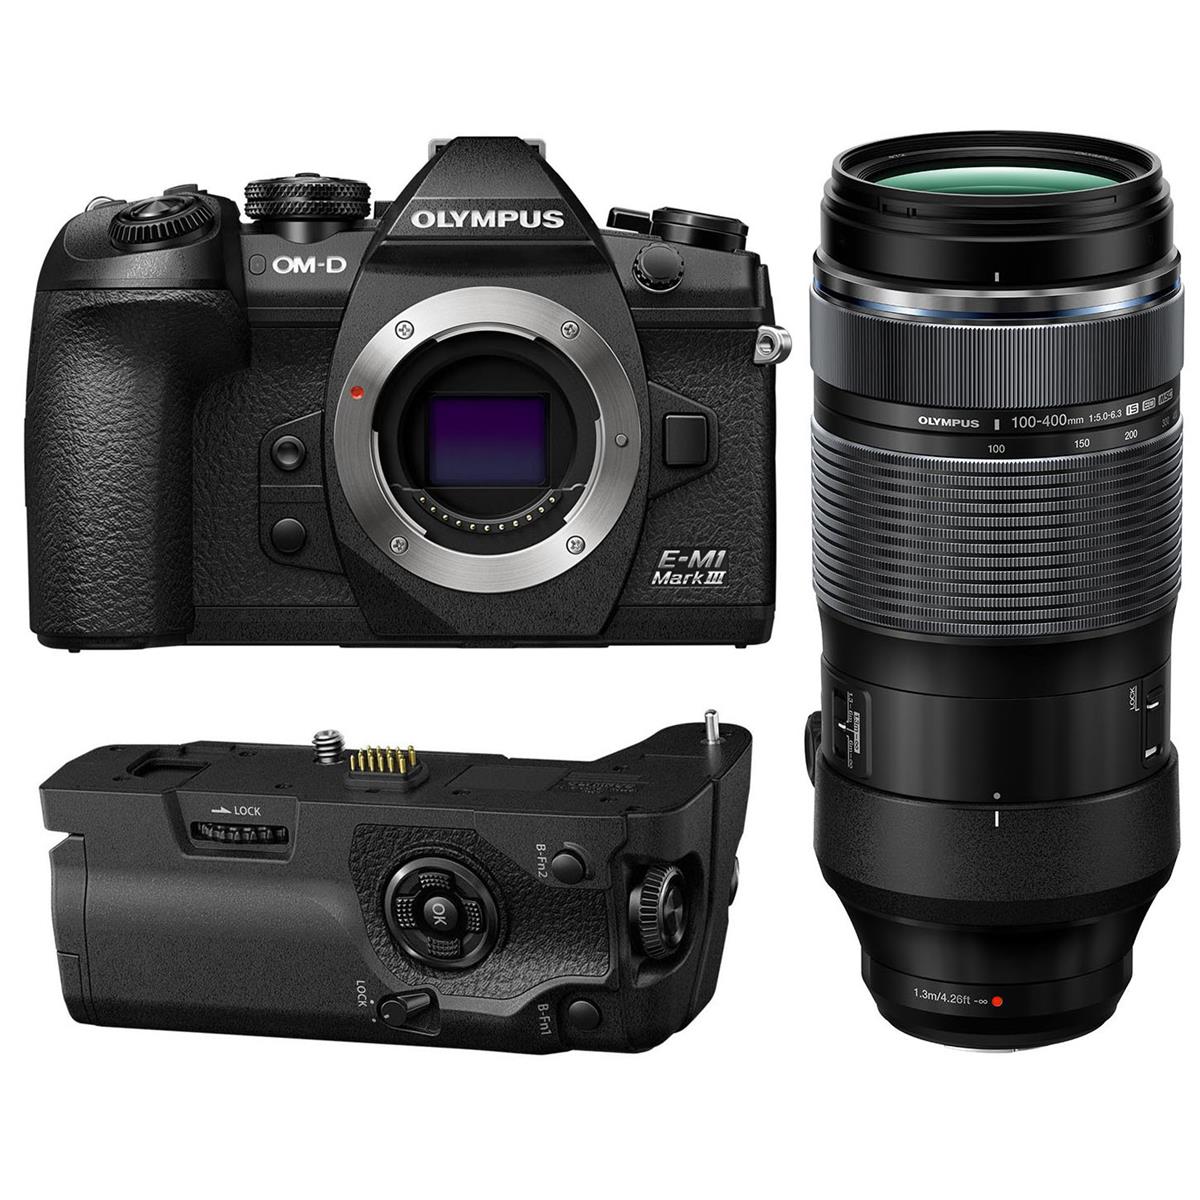 Image of Olympus OM-D E-M1 Mark III Mirrorless Camera with 100-400mm Lens